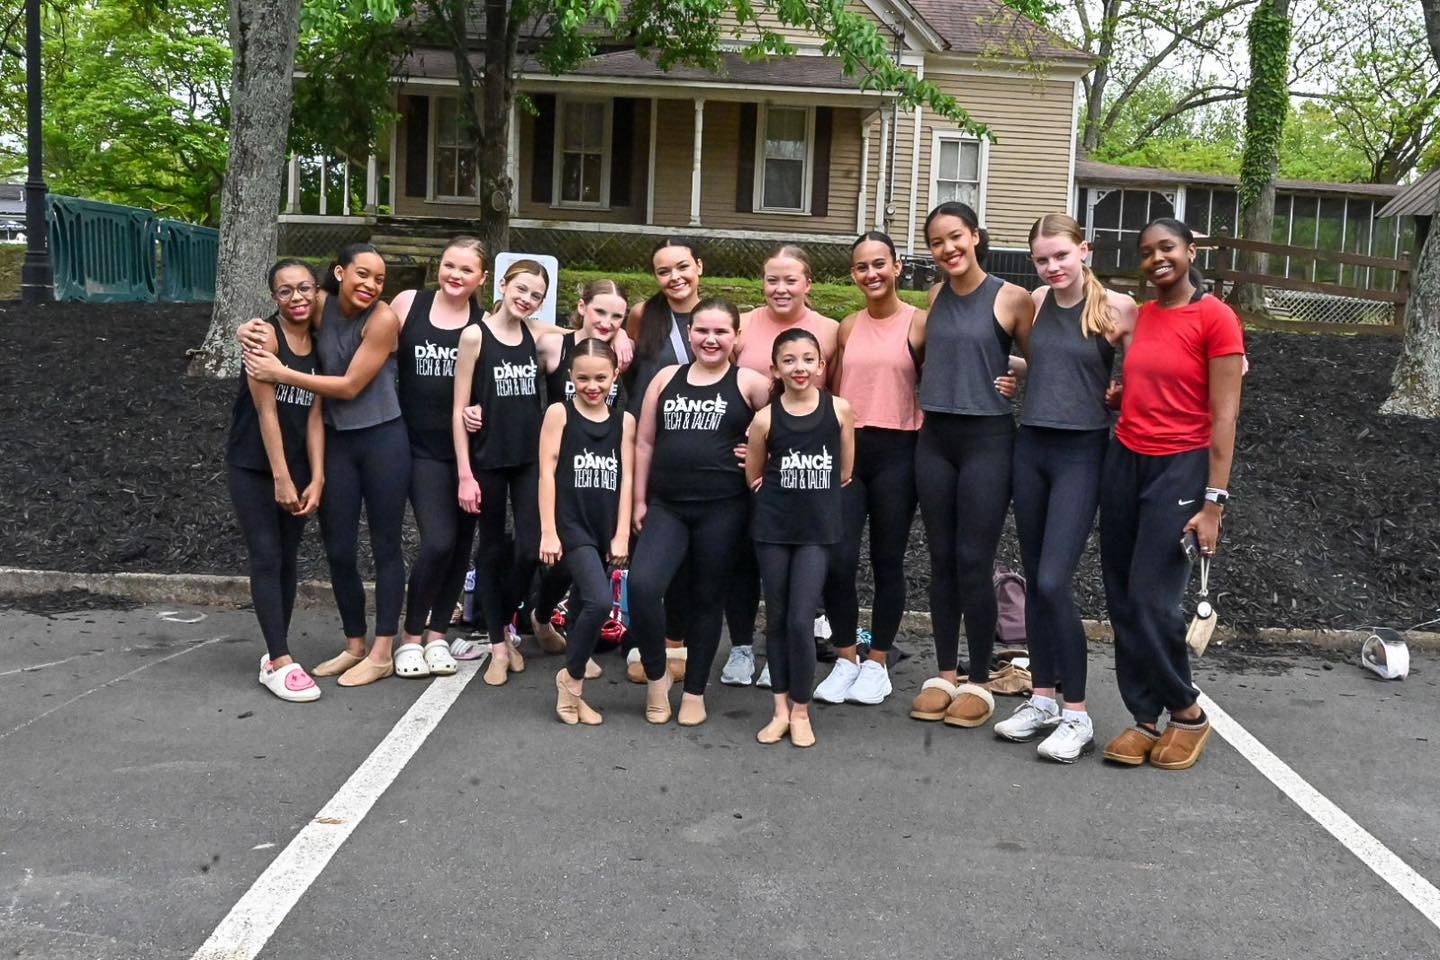 We had a wonderful time performing at Kennesaw&rsquo;s Big Shanty Festival! 

Beautiful day and dancing! 💖

📸 - Jennifer Smith 

#dancetechandtalent #bigshantyfestival